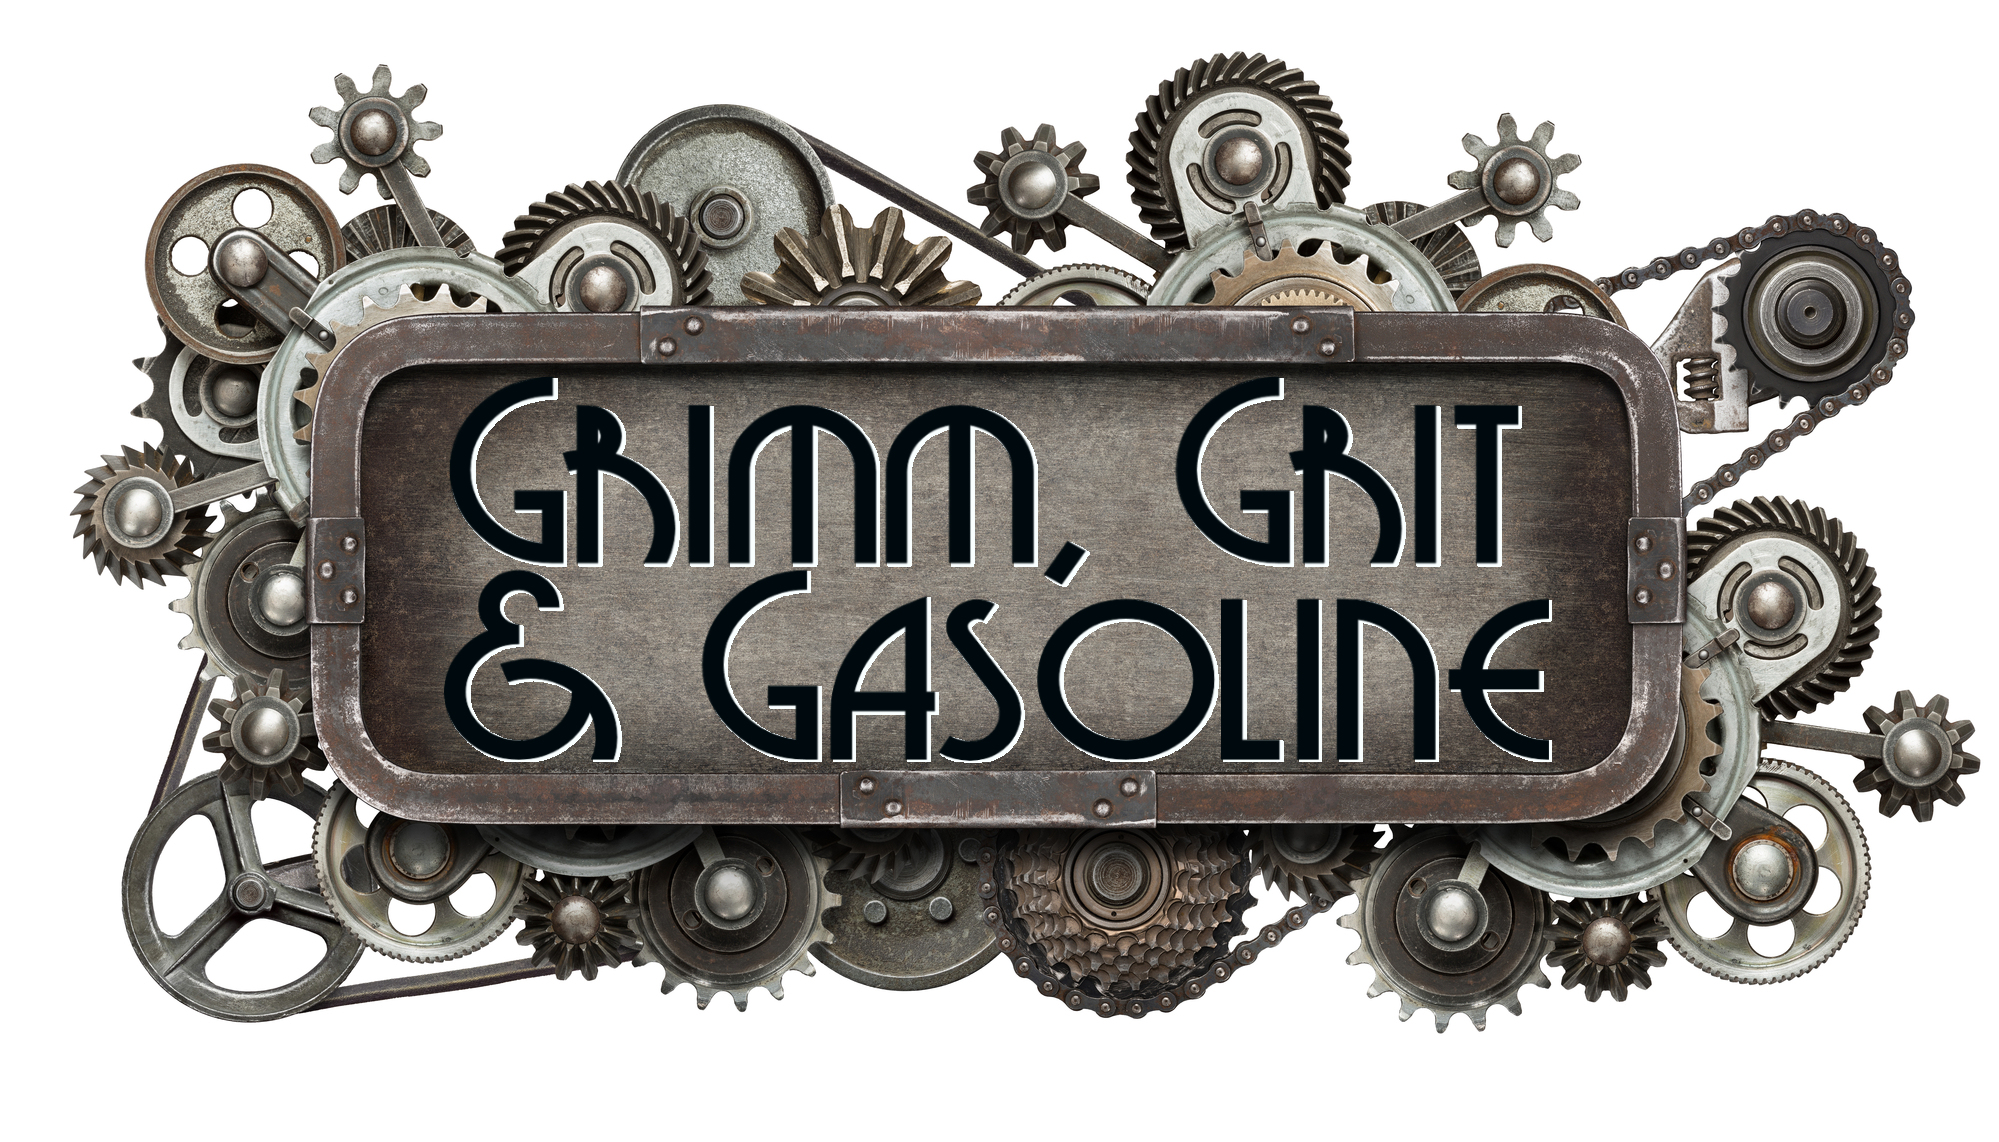 Announcing Grimm, Grit and Gasoline